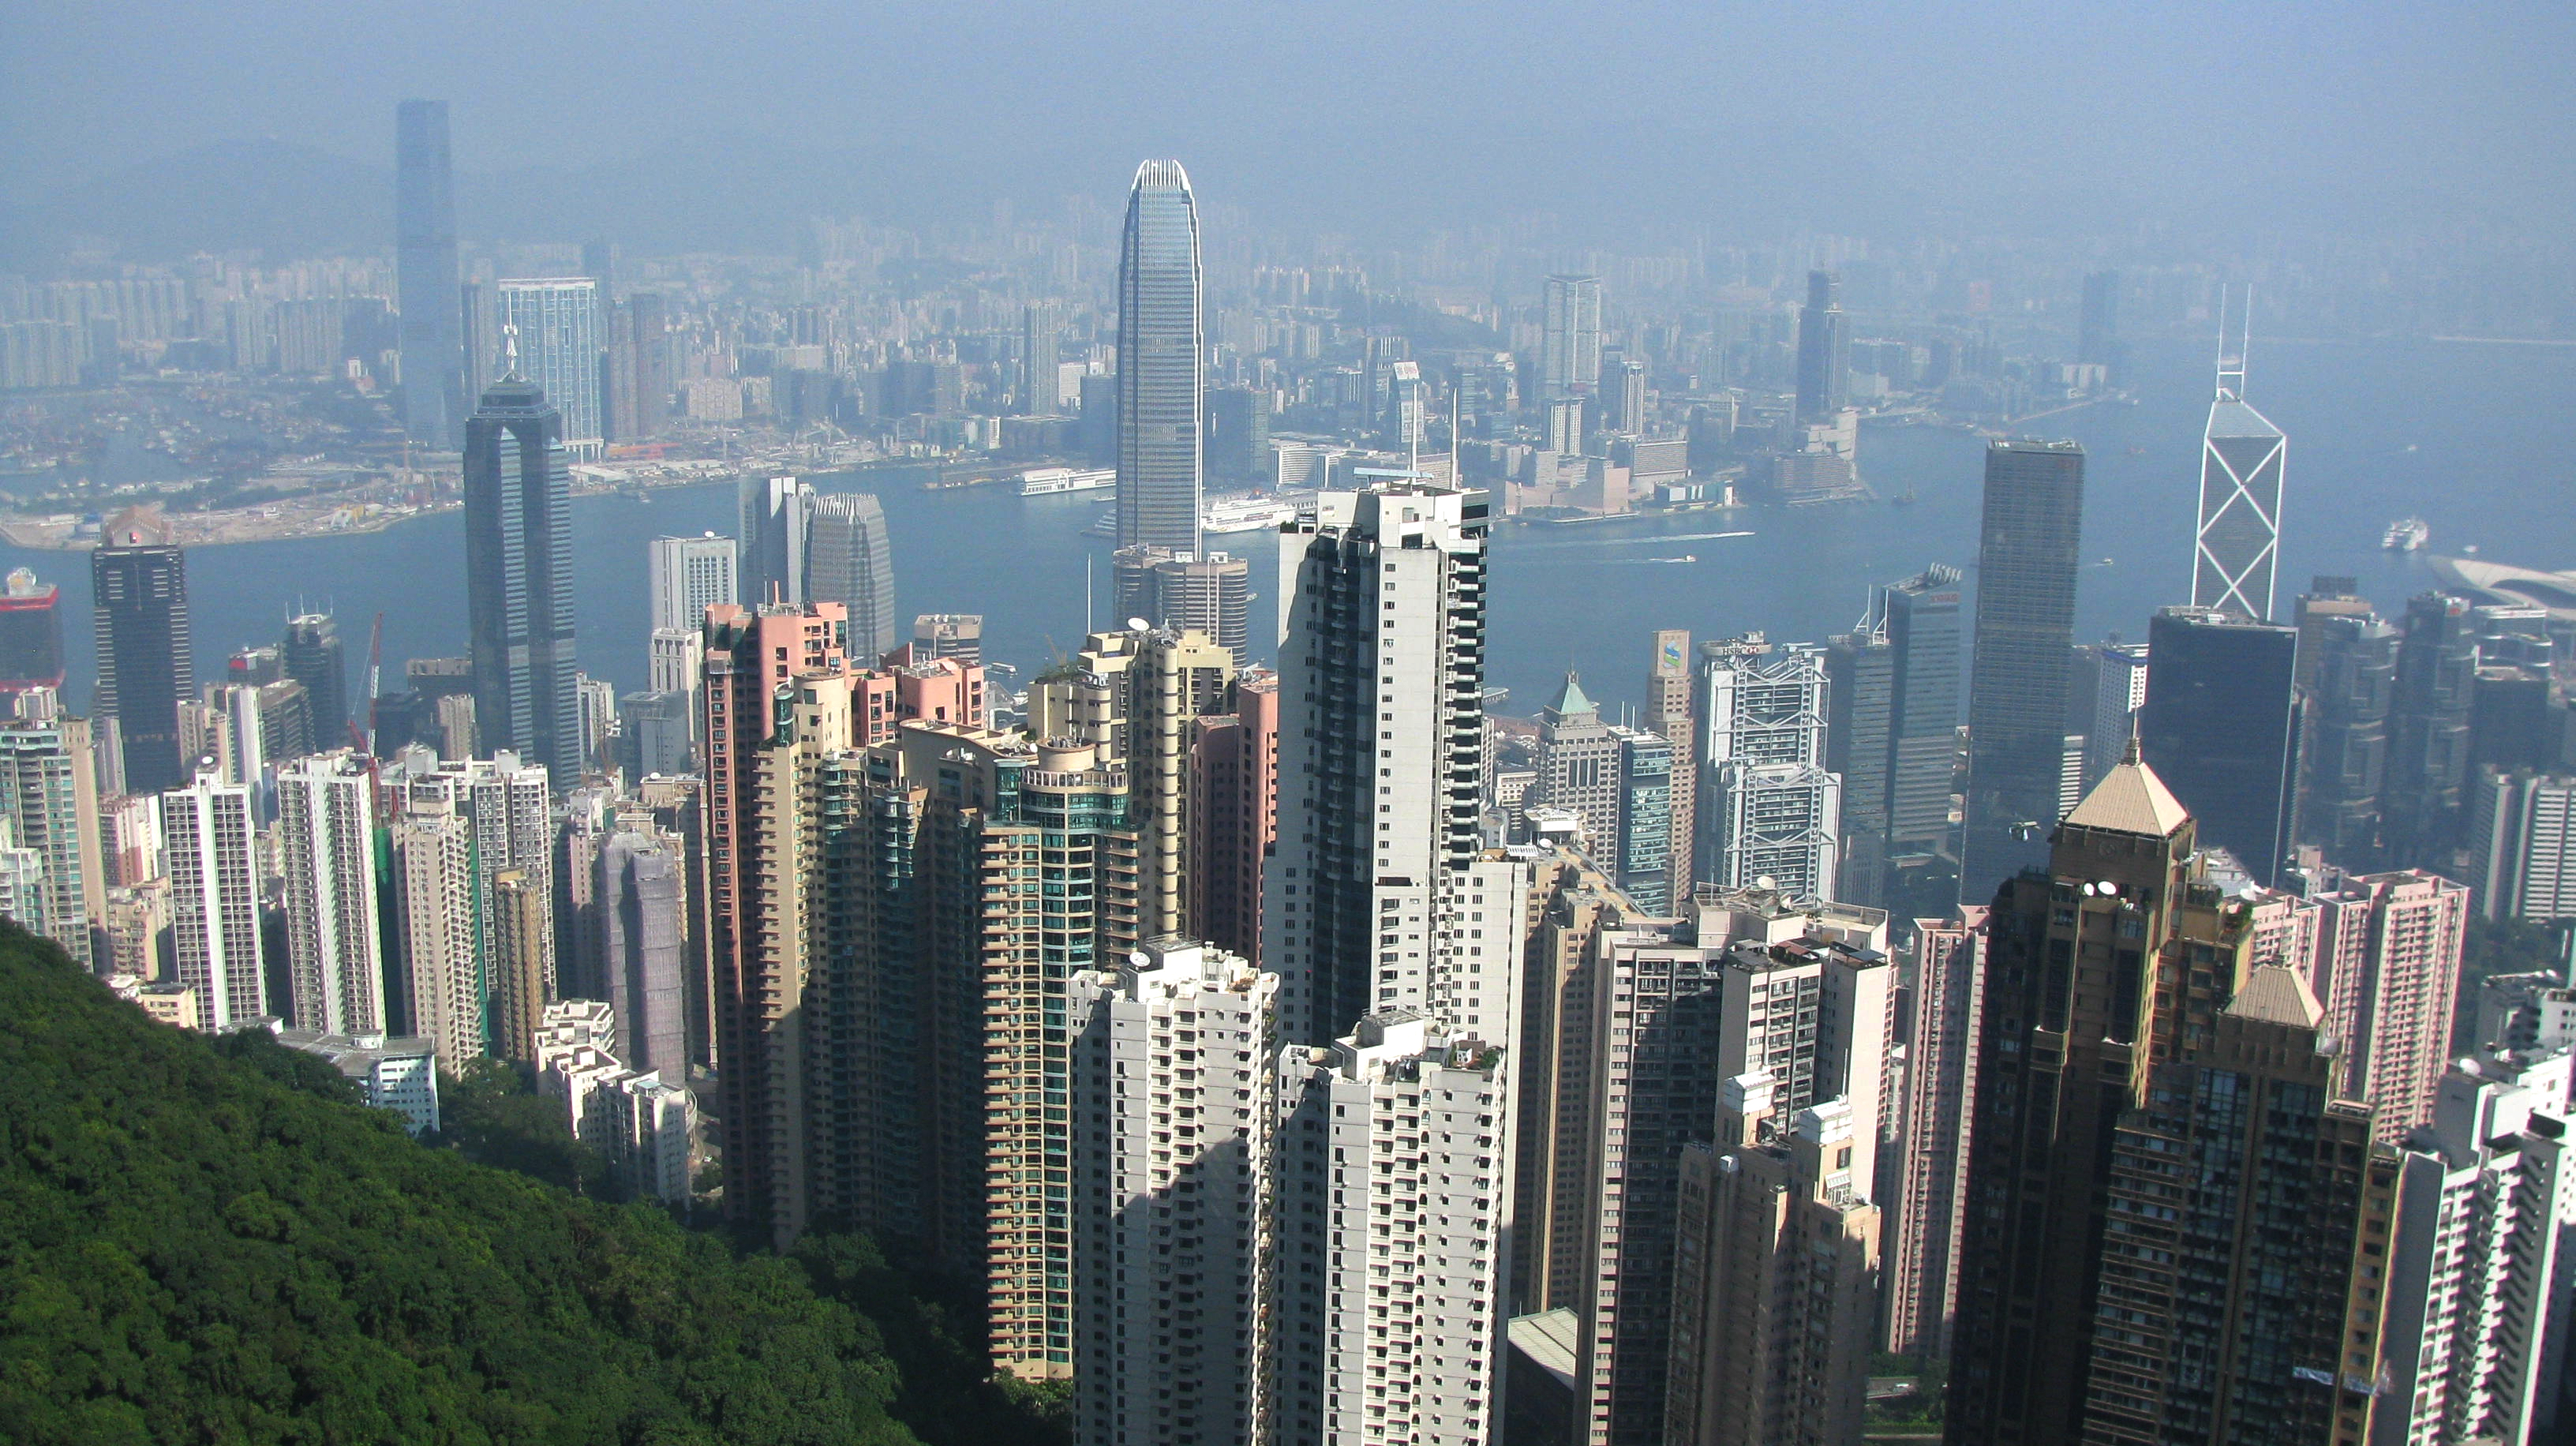 The view from Victoria Peak, Hong Kong